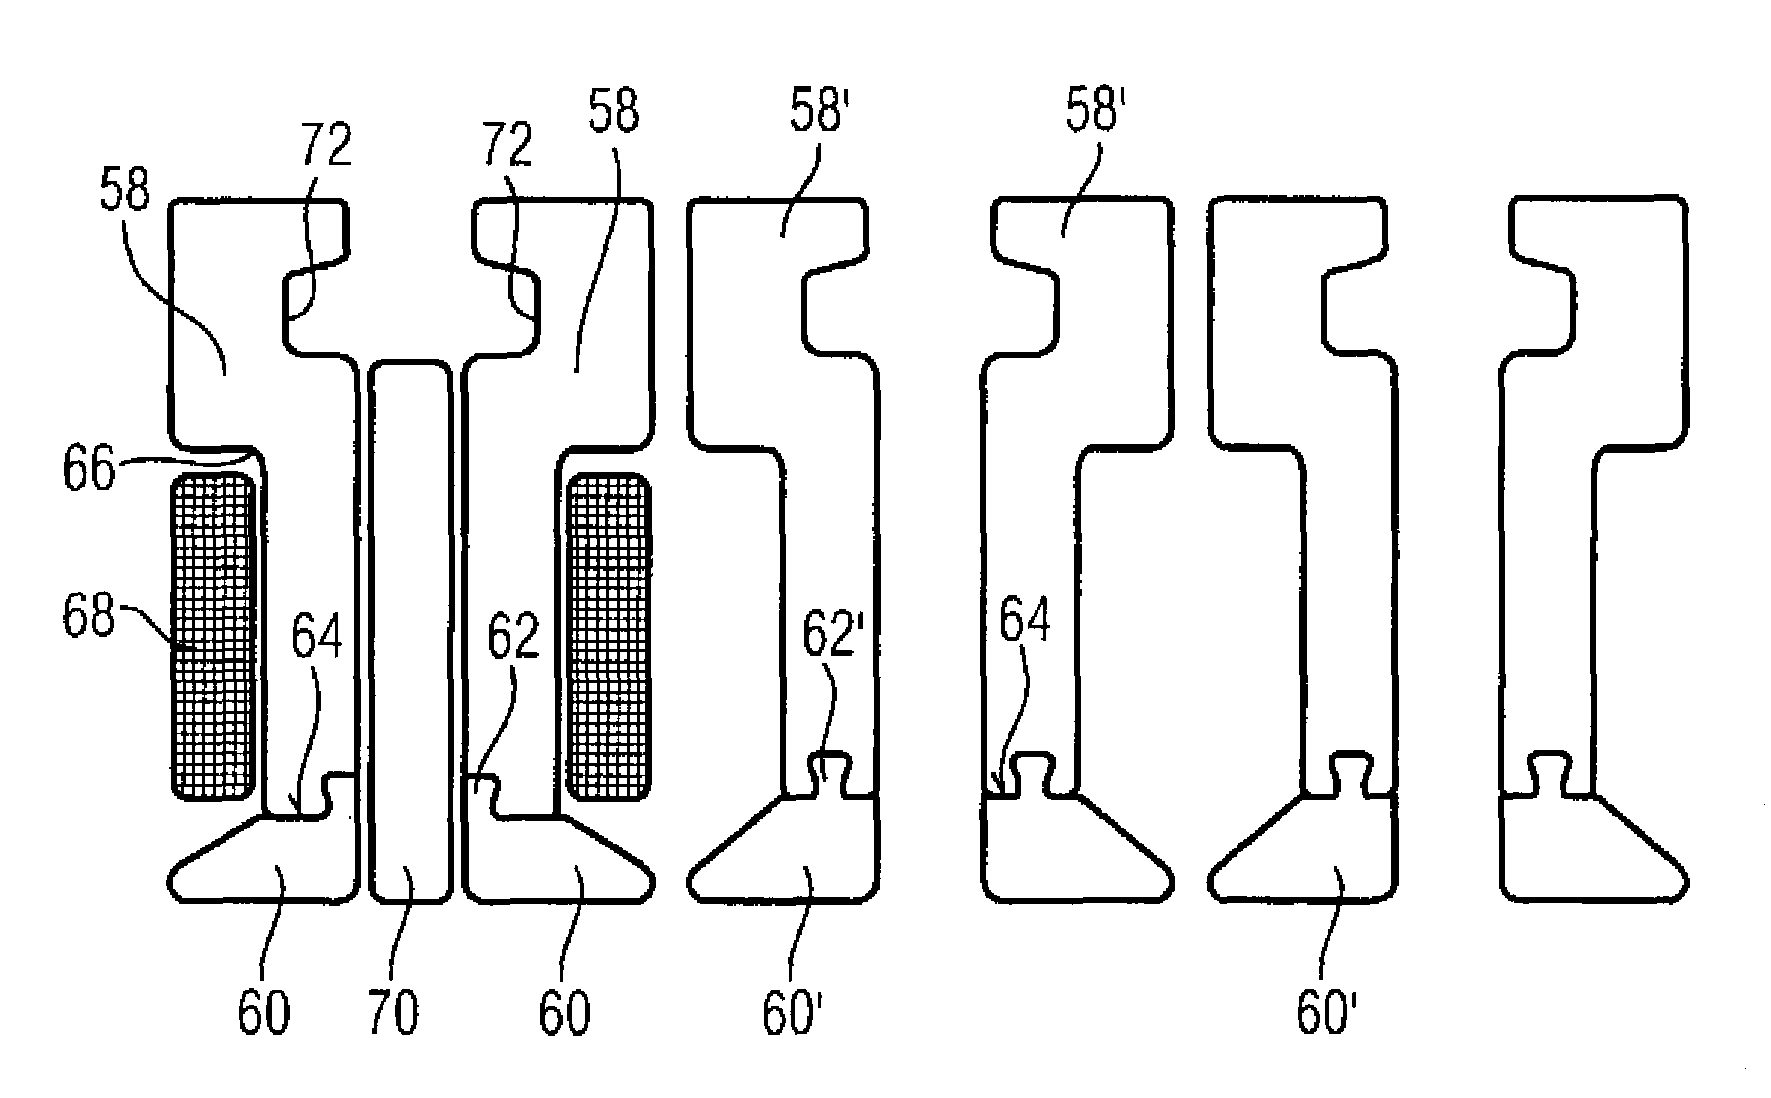 Method for providing tooth halves with removable tooth tips for an electrical machine